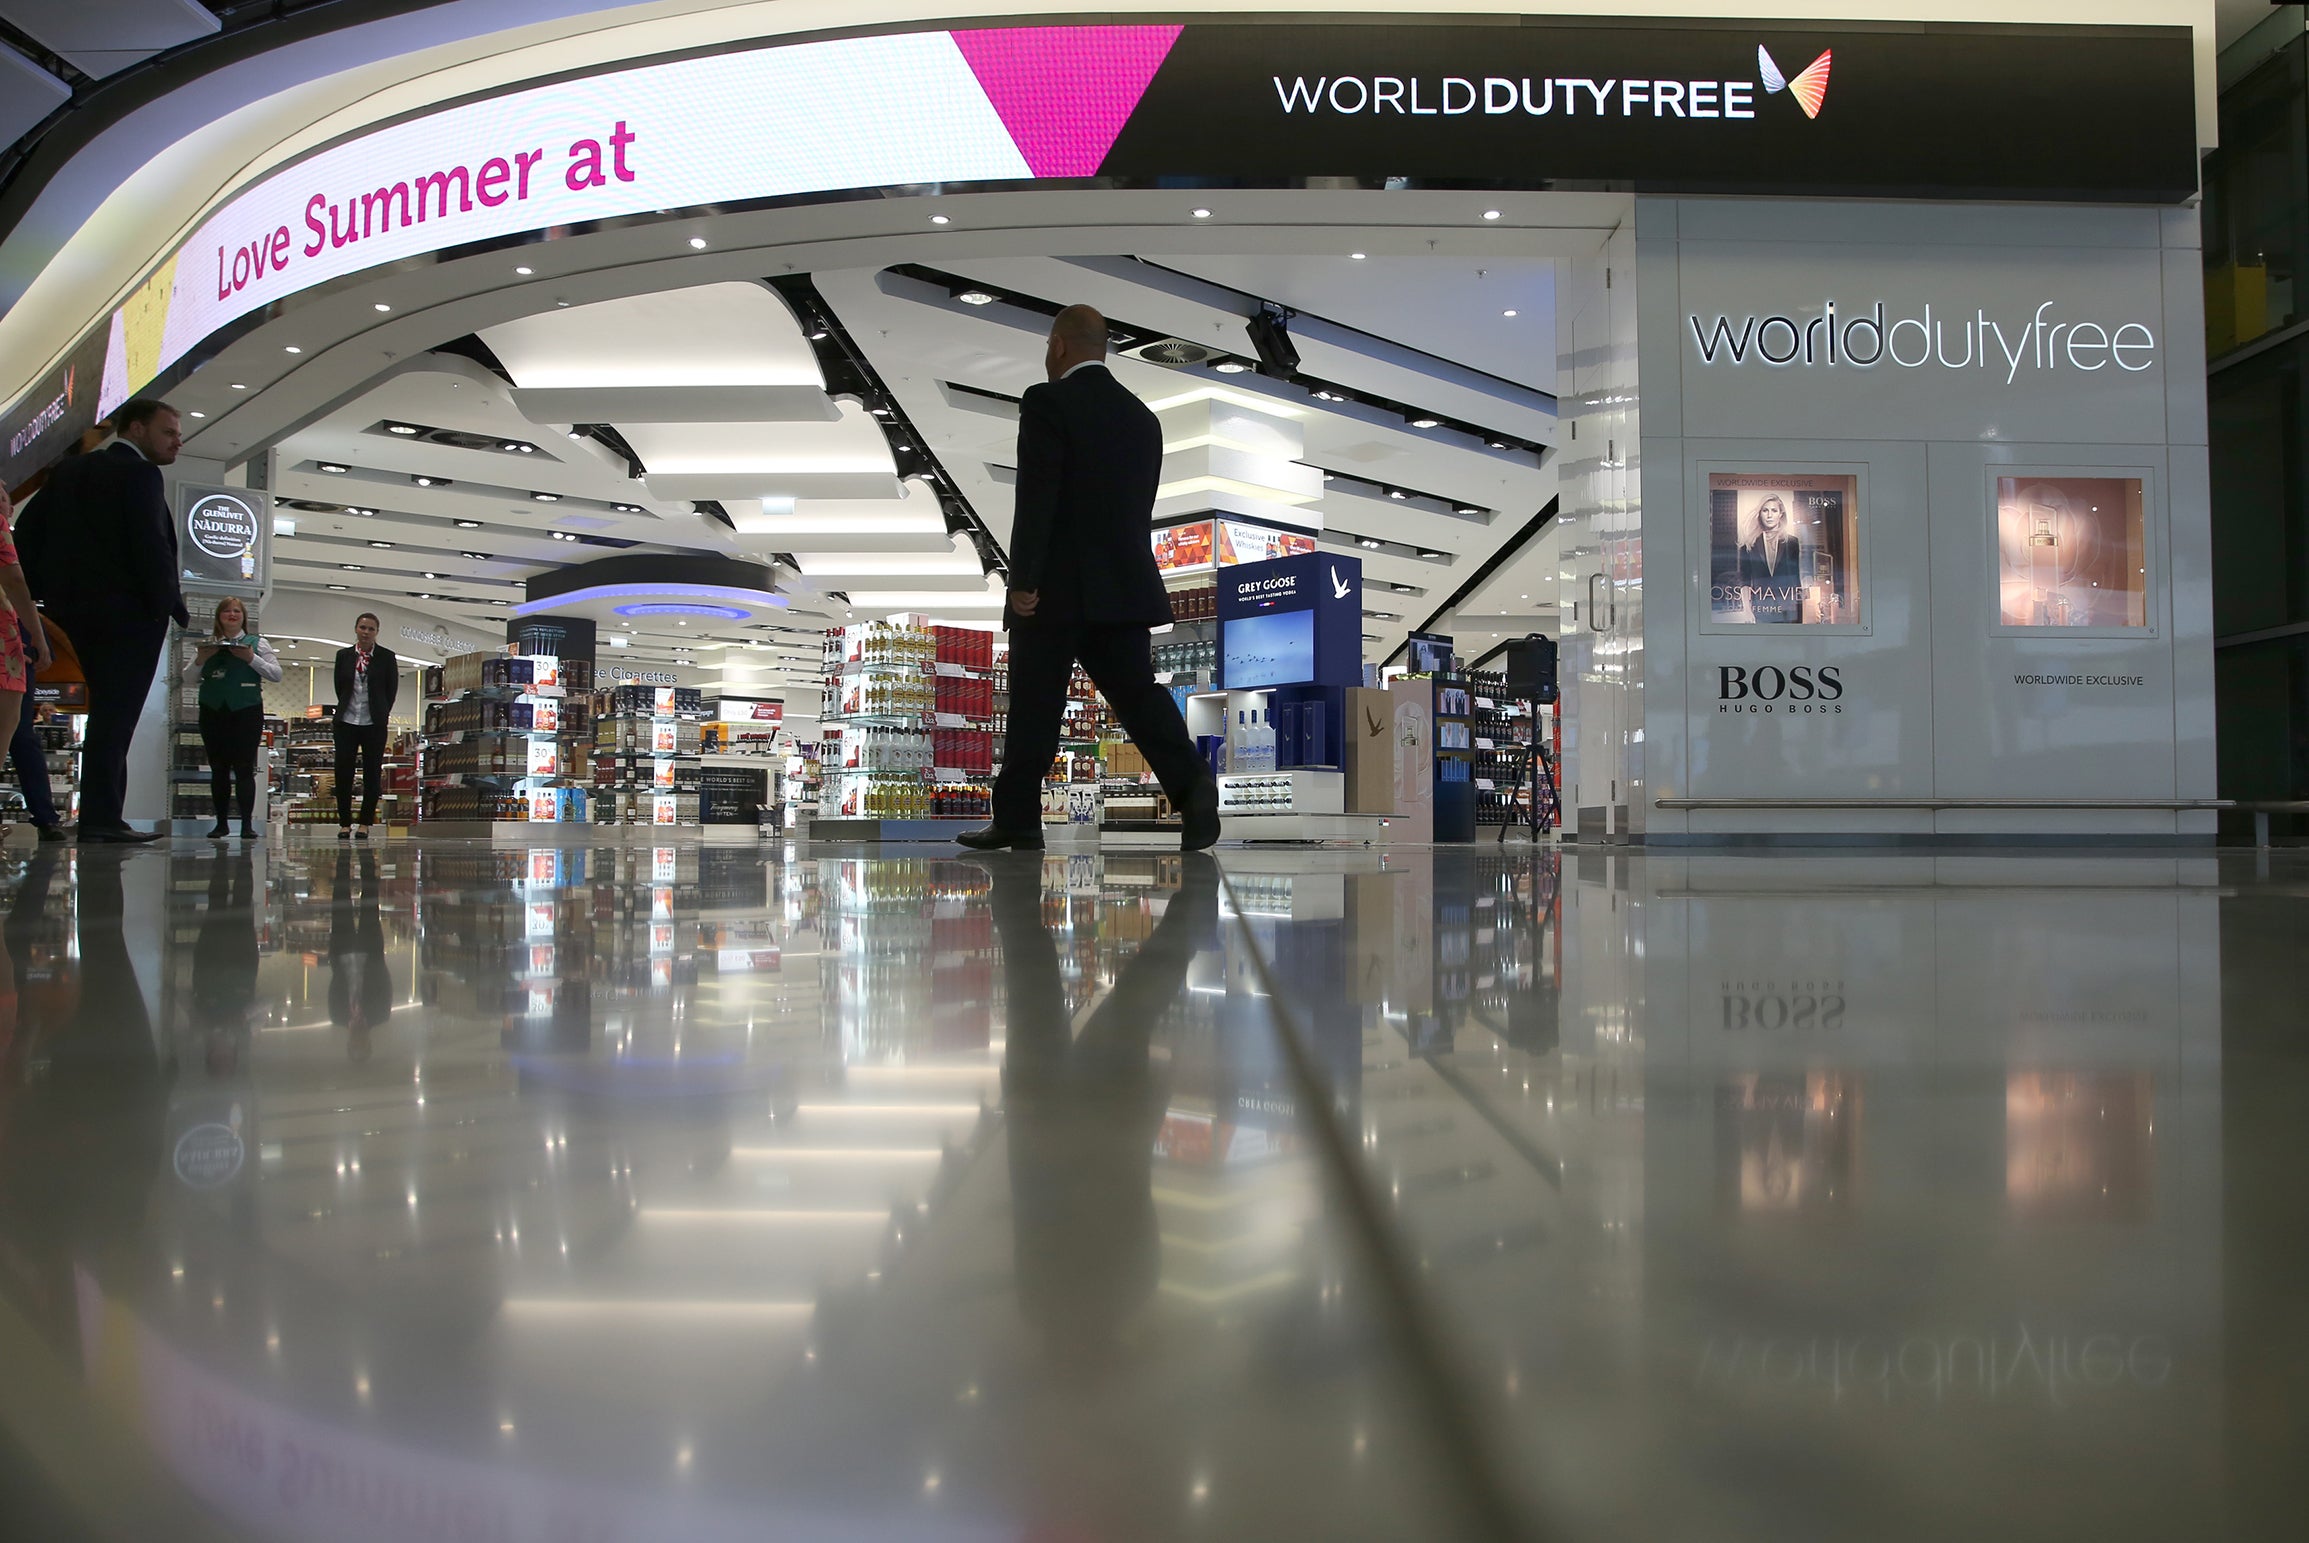 World Duty Free is the main duty free chain across the UK